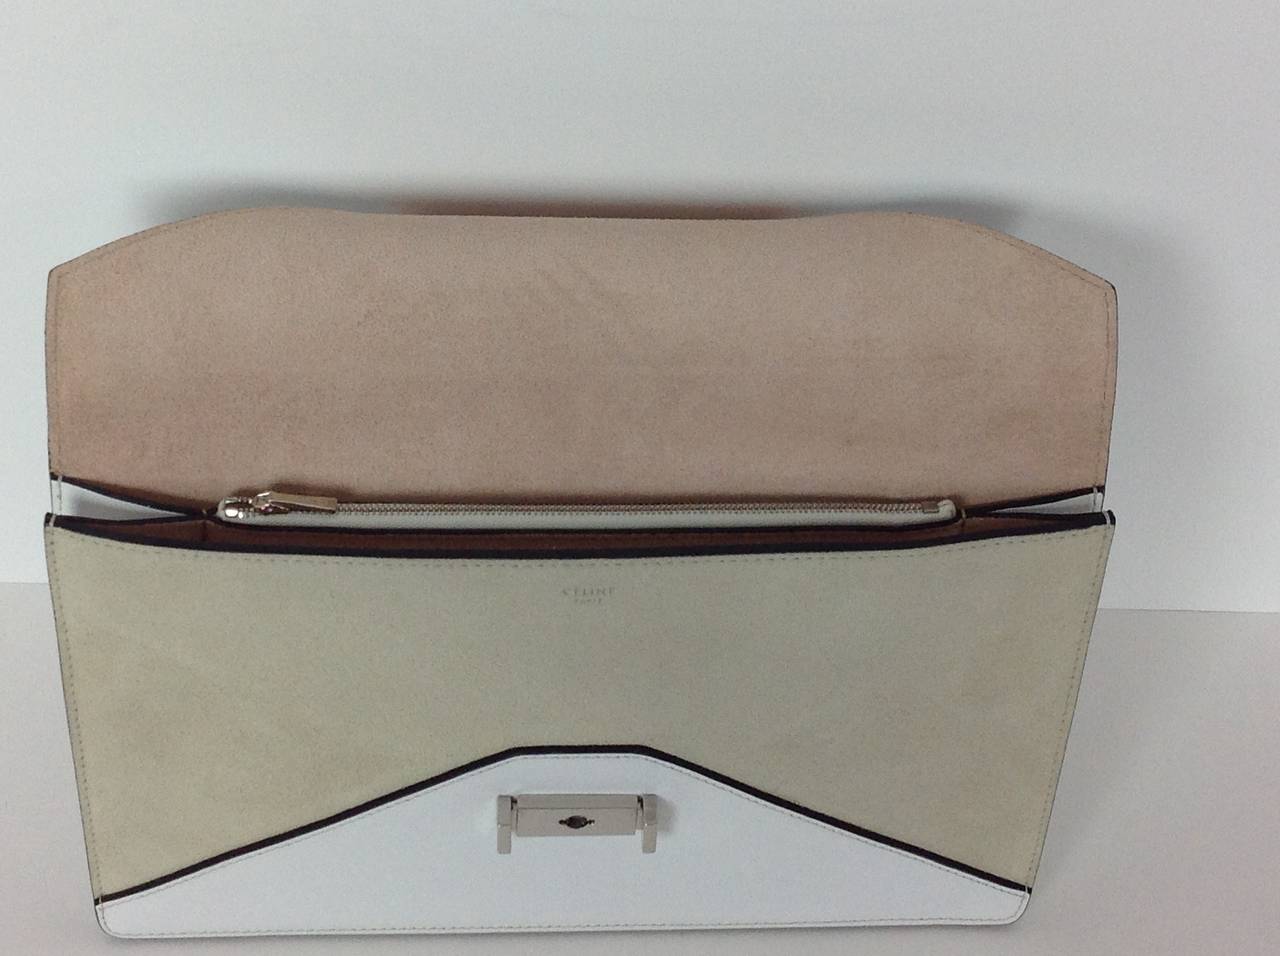 Celine Diamond Clutch bag sand suede and white leather.
Lined in natural suede with 3 compartments.  One compartment has a zipper.
Chrome Celine engraved squeeze buckle closure.
Dustbag included. Paperwork still in the bag.
Original retail